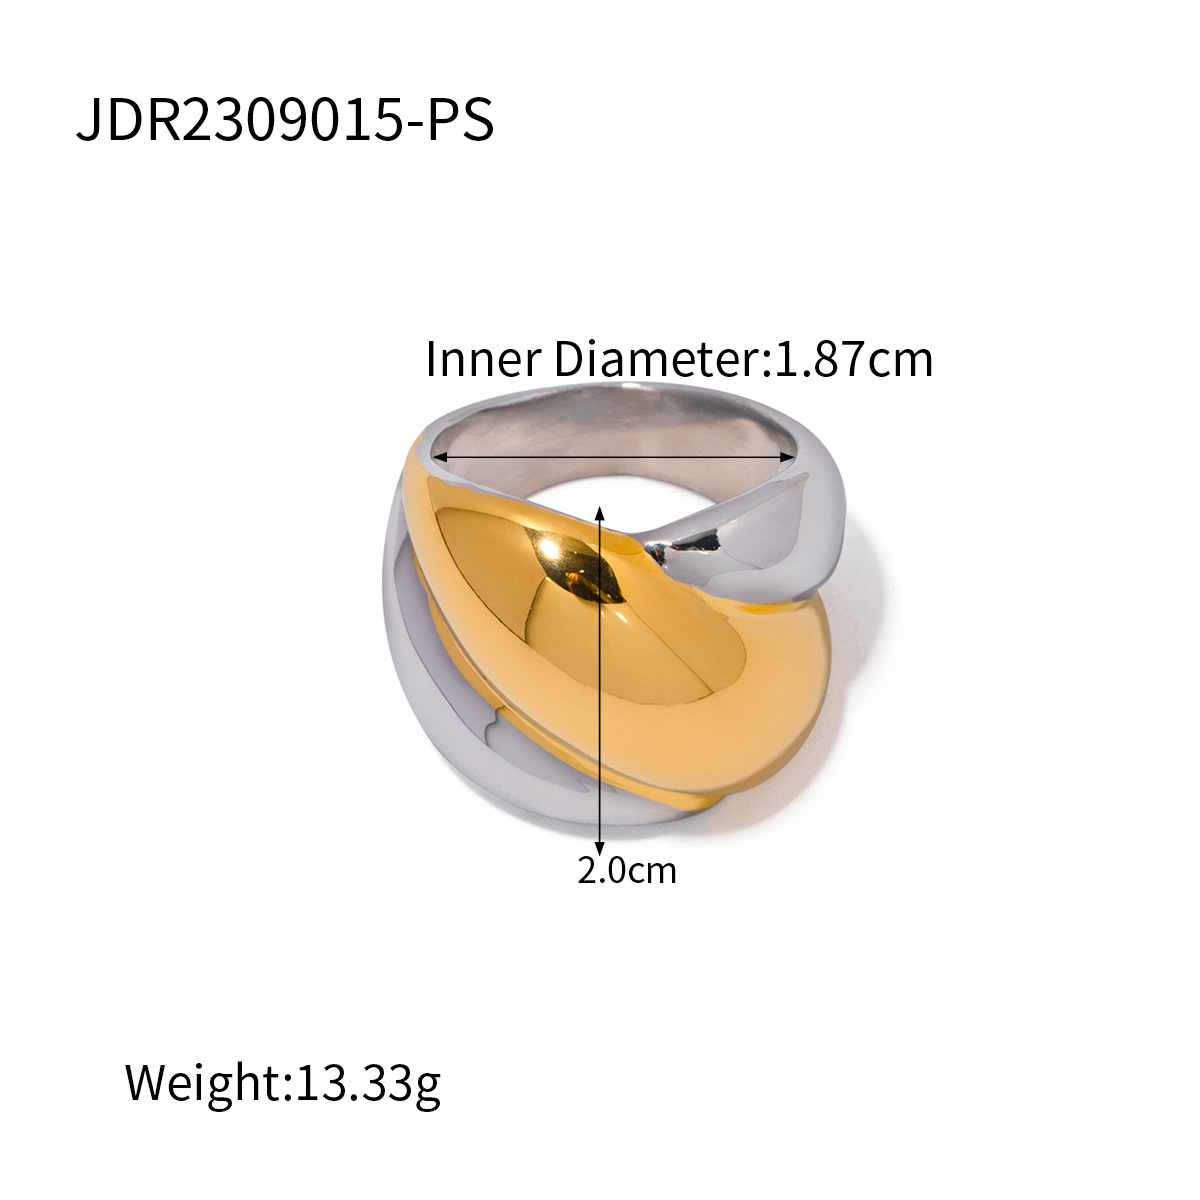 3:JDR2309015-PS